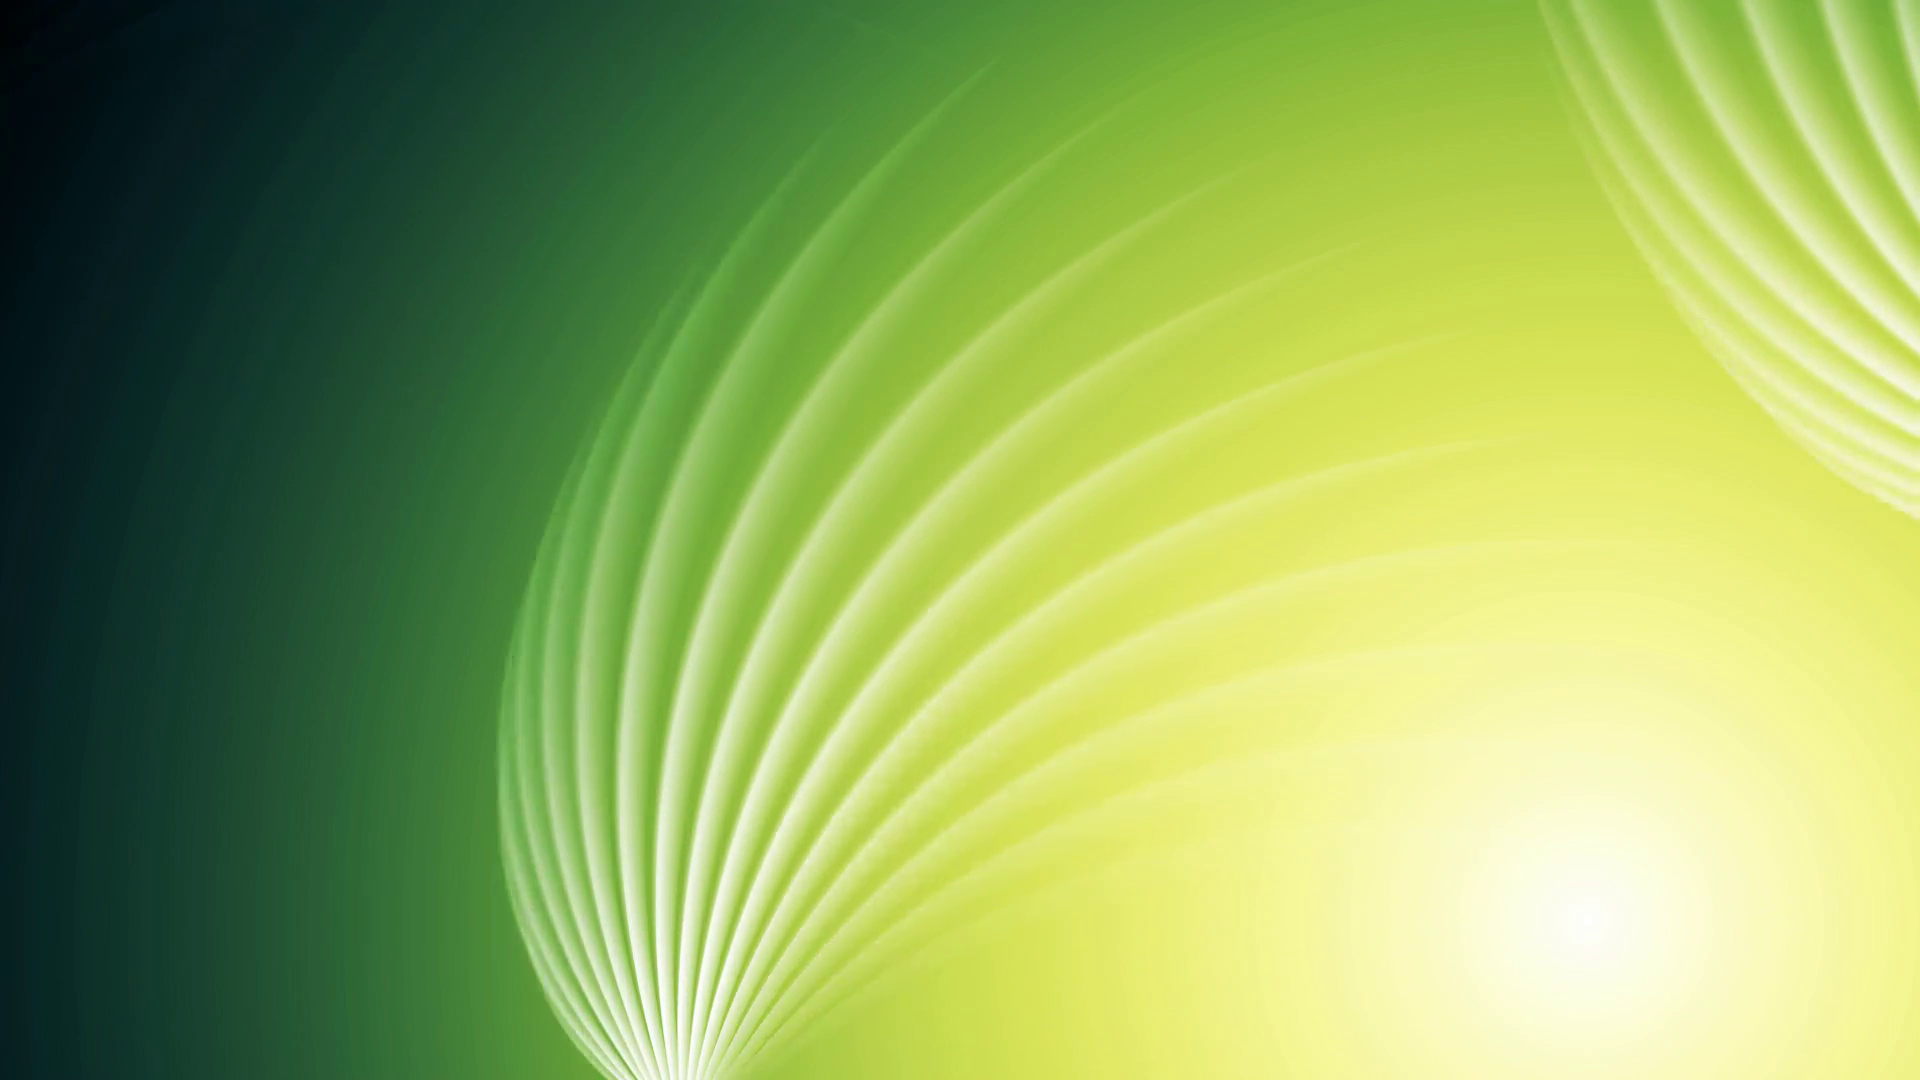 Bright Green Shiny Swirl Abstract Background Video